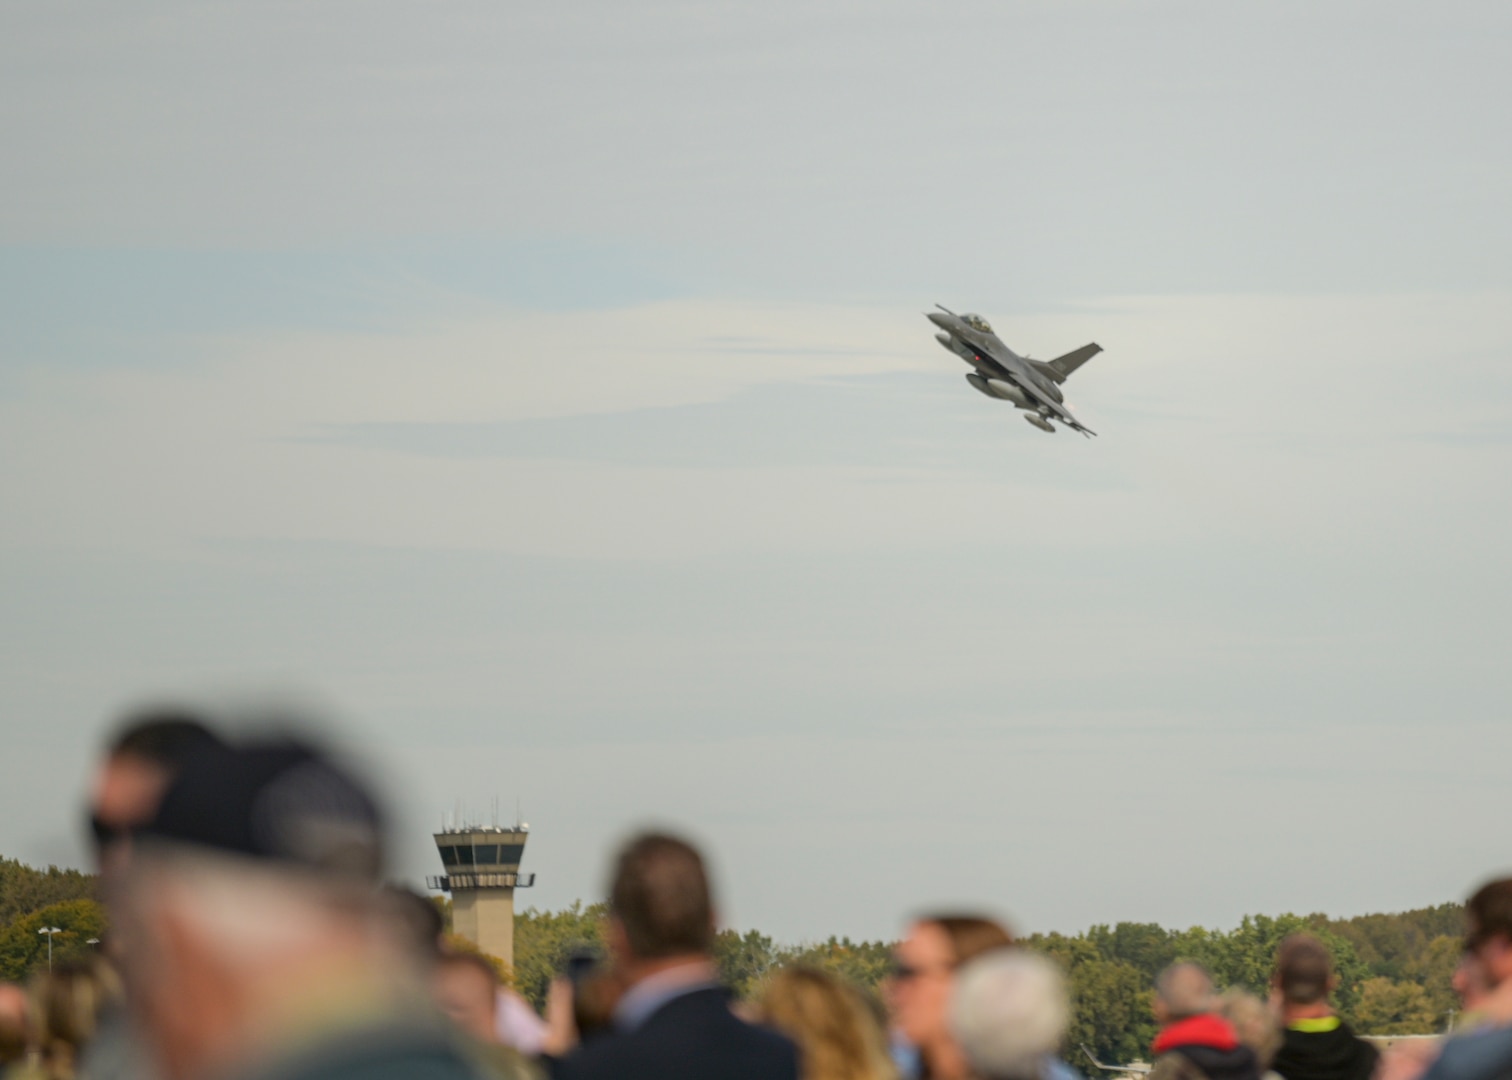 An F-16 Fighting Falcon assigned to the Wisconsin Air National Guard's 115th Fighter Wing overflies Truax Field, Madison, Wisconsin, during a ceremony commemorating the unit's last F-16 to depart Oct. 5, 2022. The F-16 first arrived at Truax Field in 1992 as the eighth primary airframe since the unit's inception in 1948 and is scheduled to be replaced by the F-35 Lightning II aircraft in the spring .